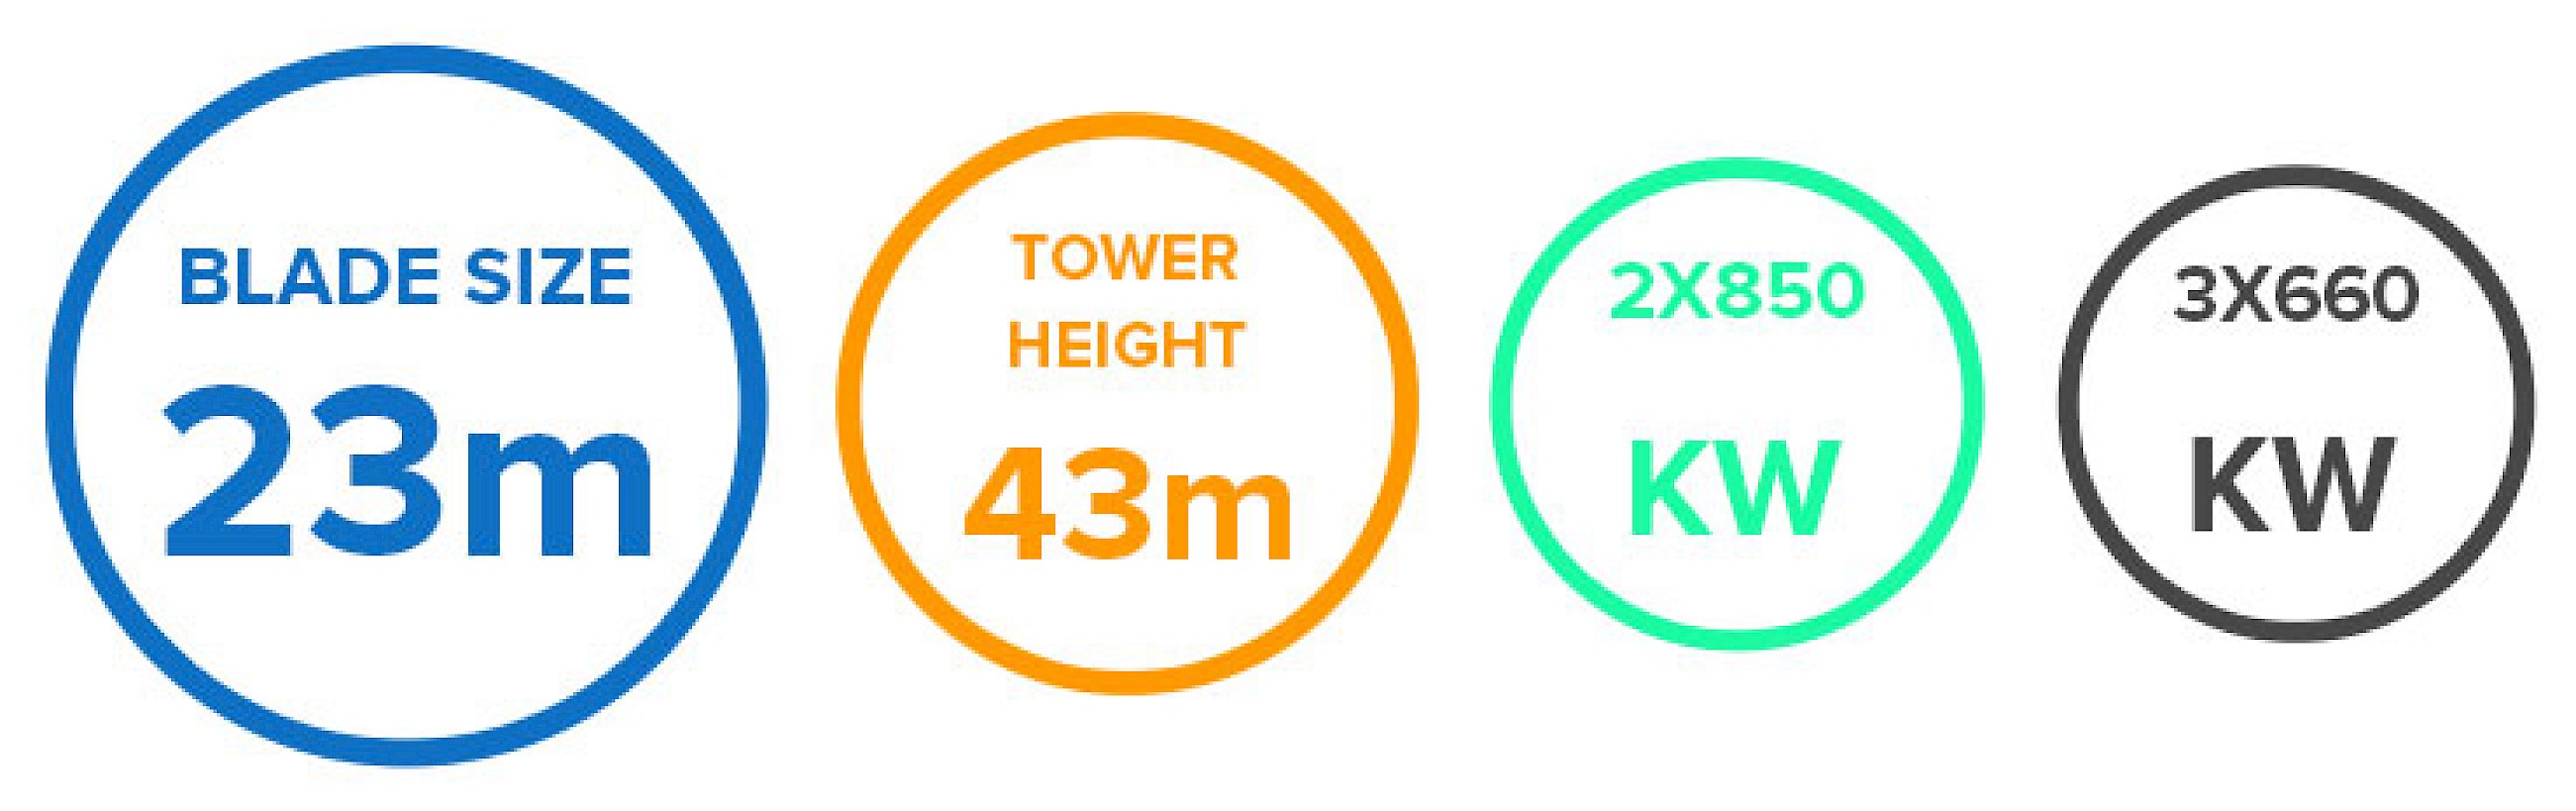 Infographics about Burradale - Blade size: 23M, Tower height: 43m, 2X850KW, 3X660KW